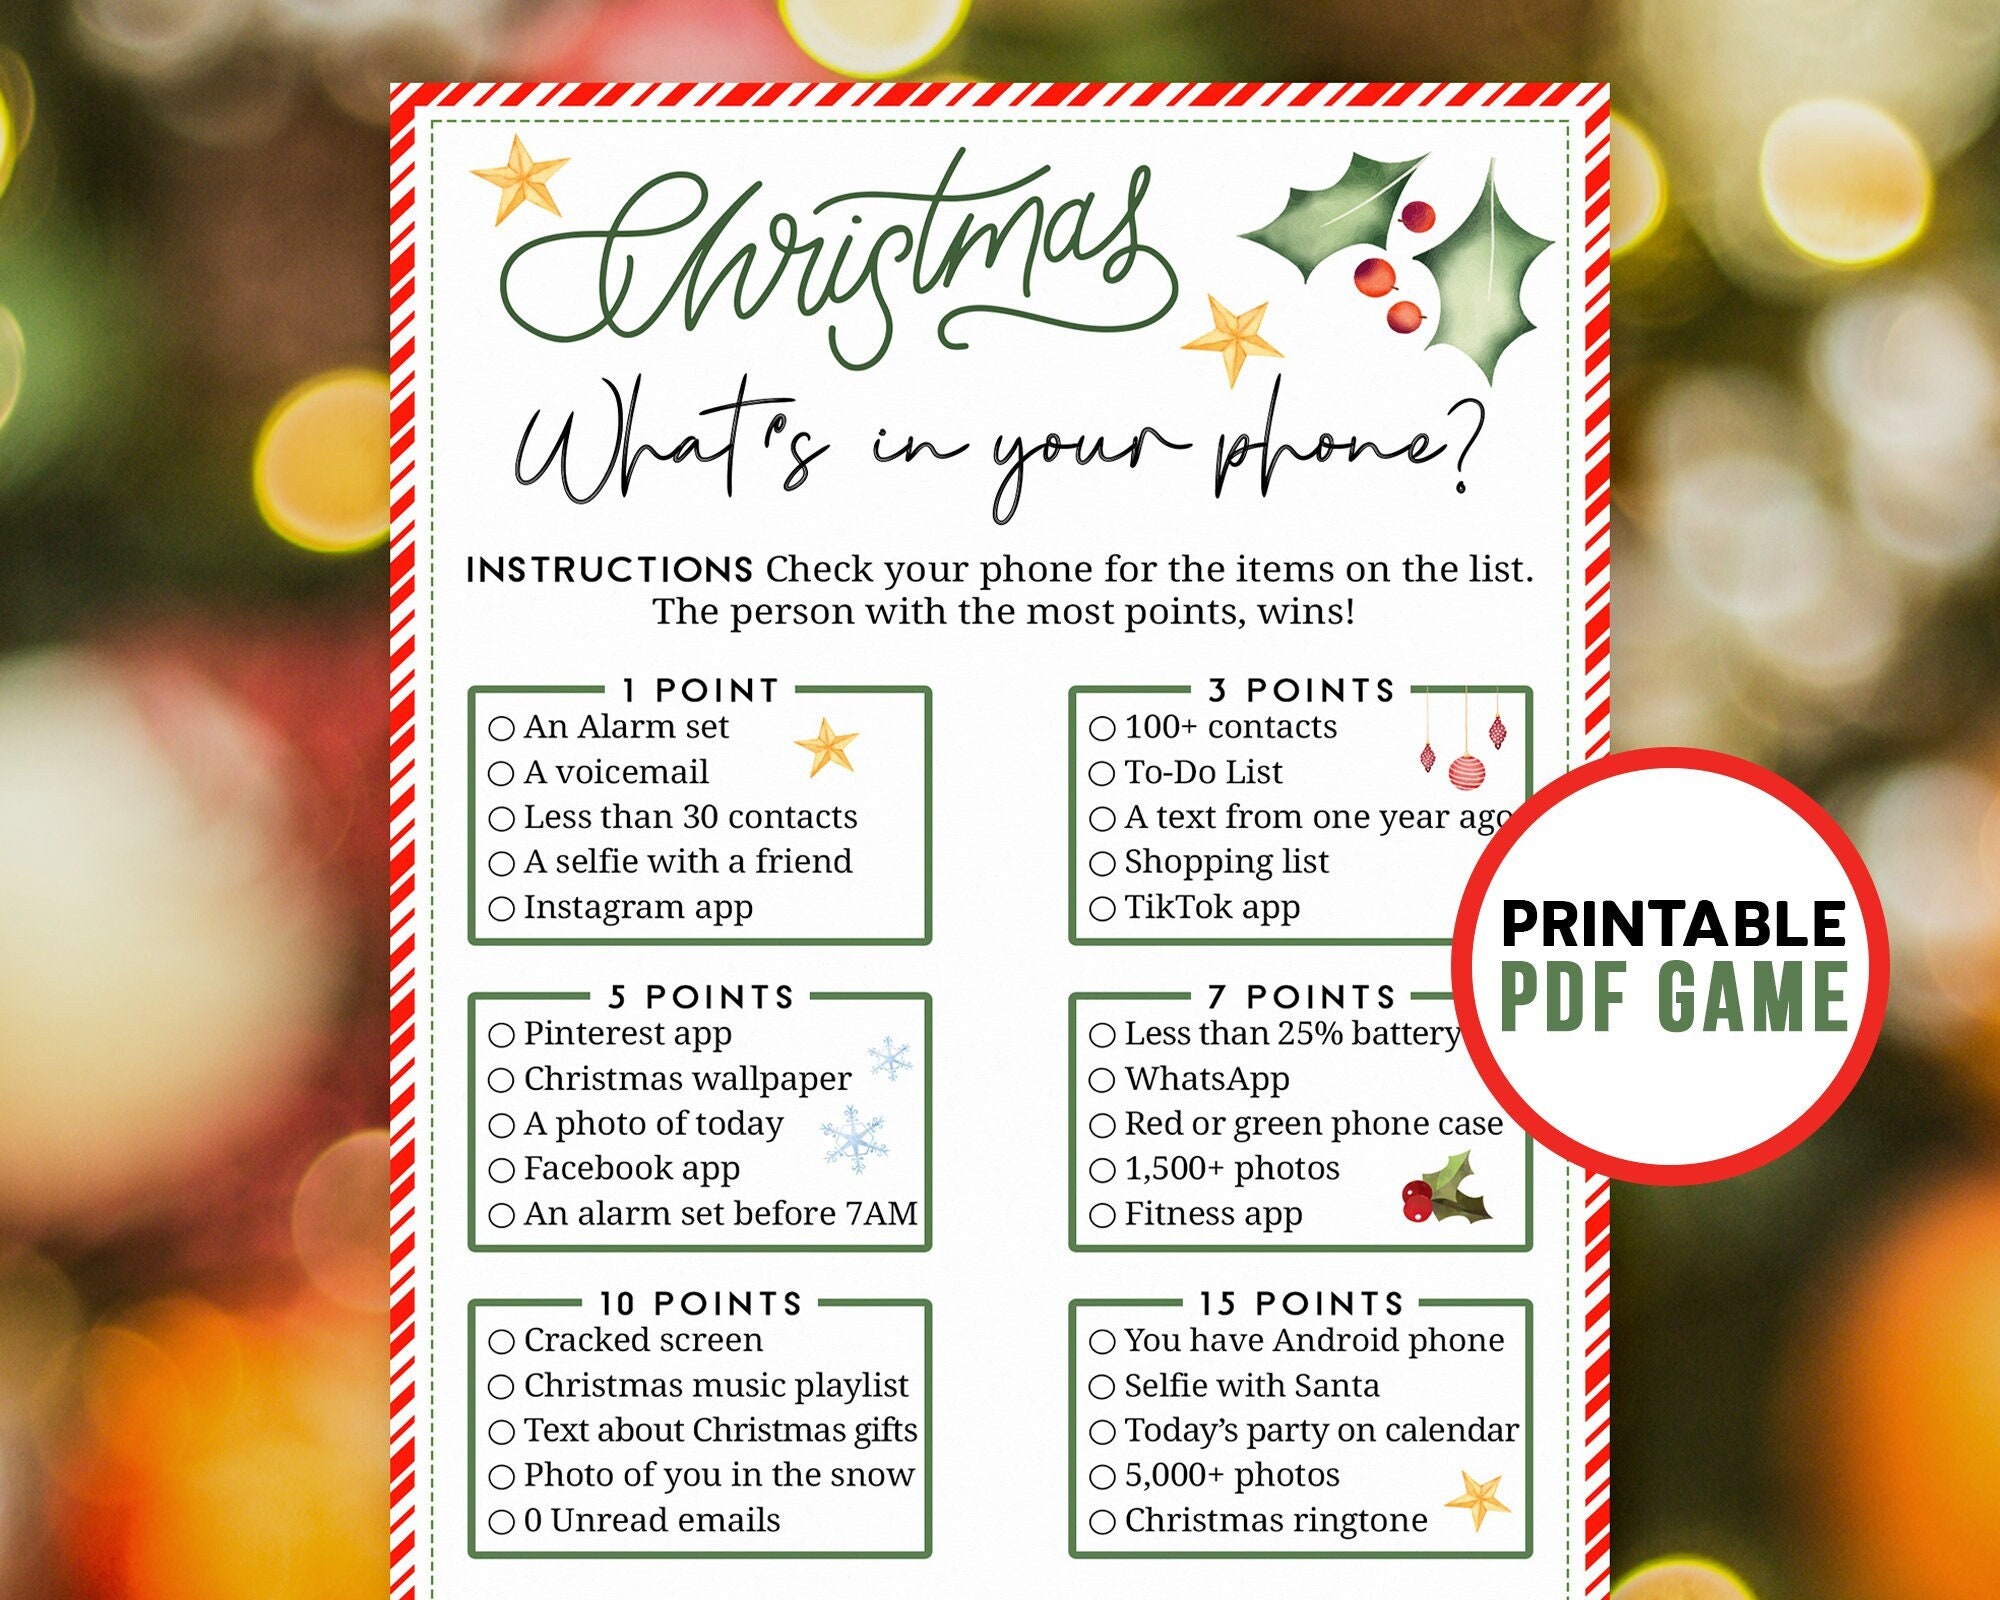 Fun Christmas Whats in Your Phone Christmas Party Games - Etsy